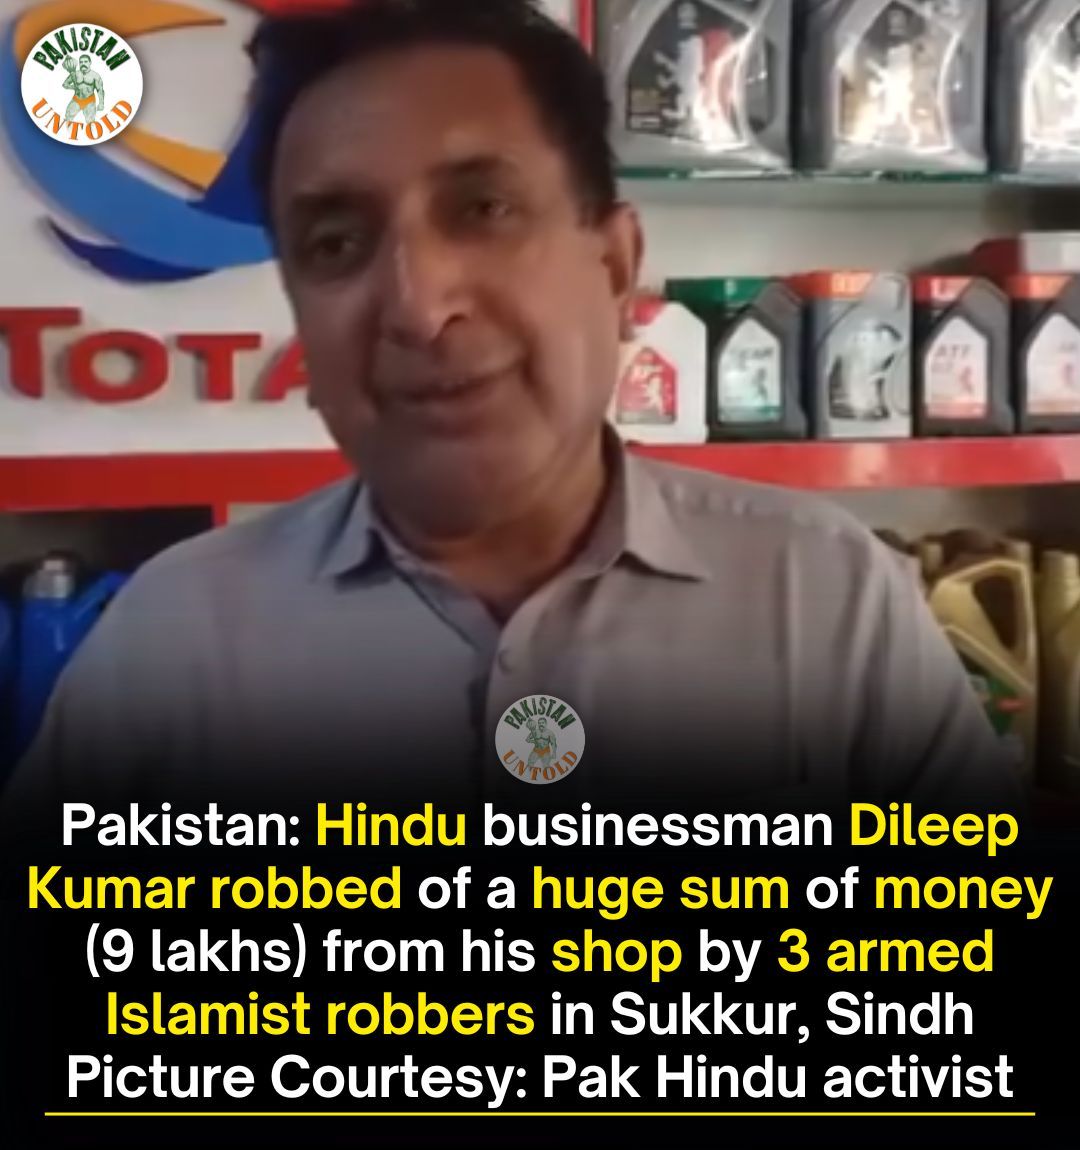 Pakistani Hindu businessman robbed by Islamists of his hard-earned money. Jizya collection from Hindus intensifies in a bankrupt Islamic republic.